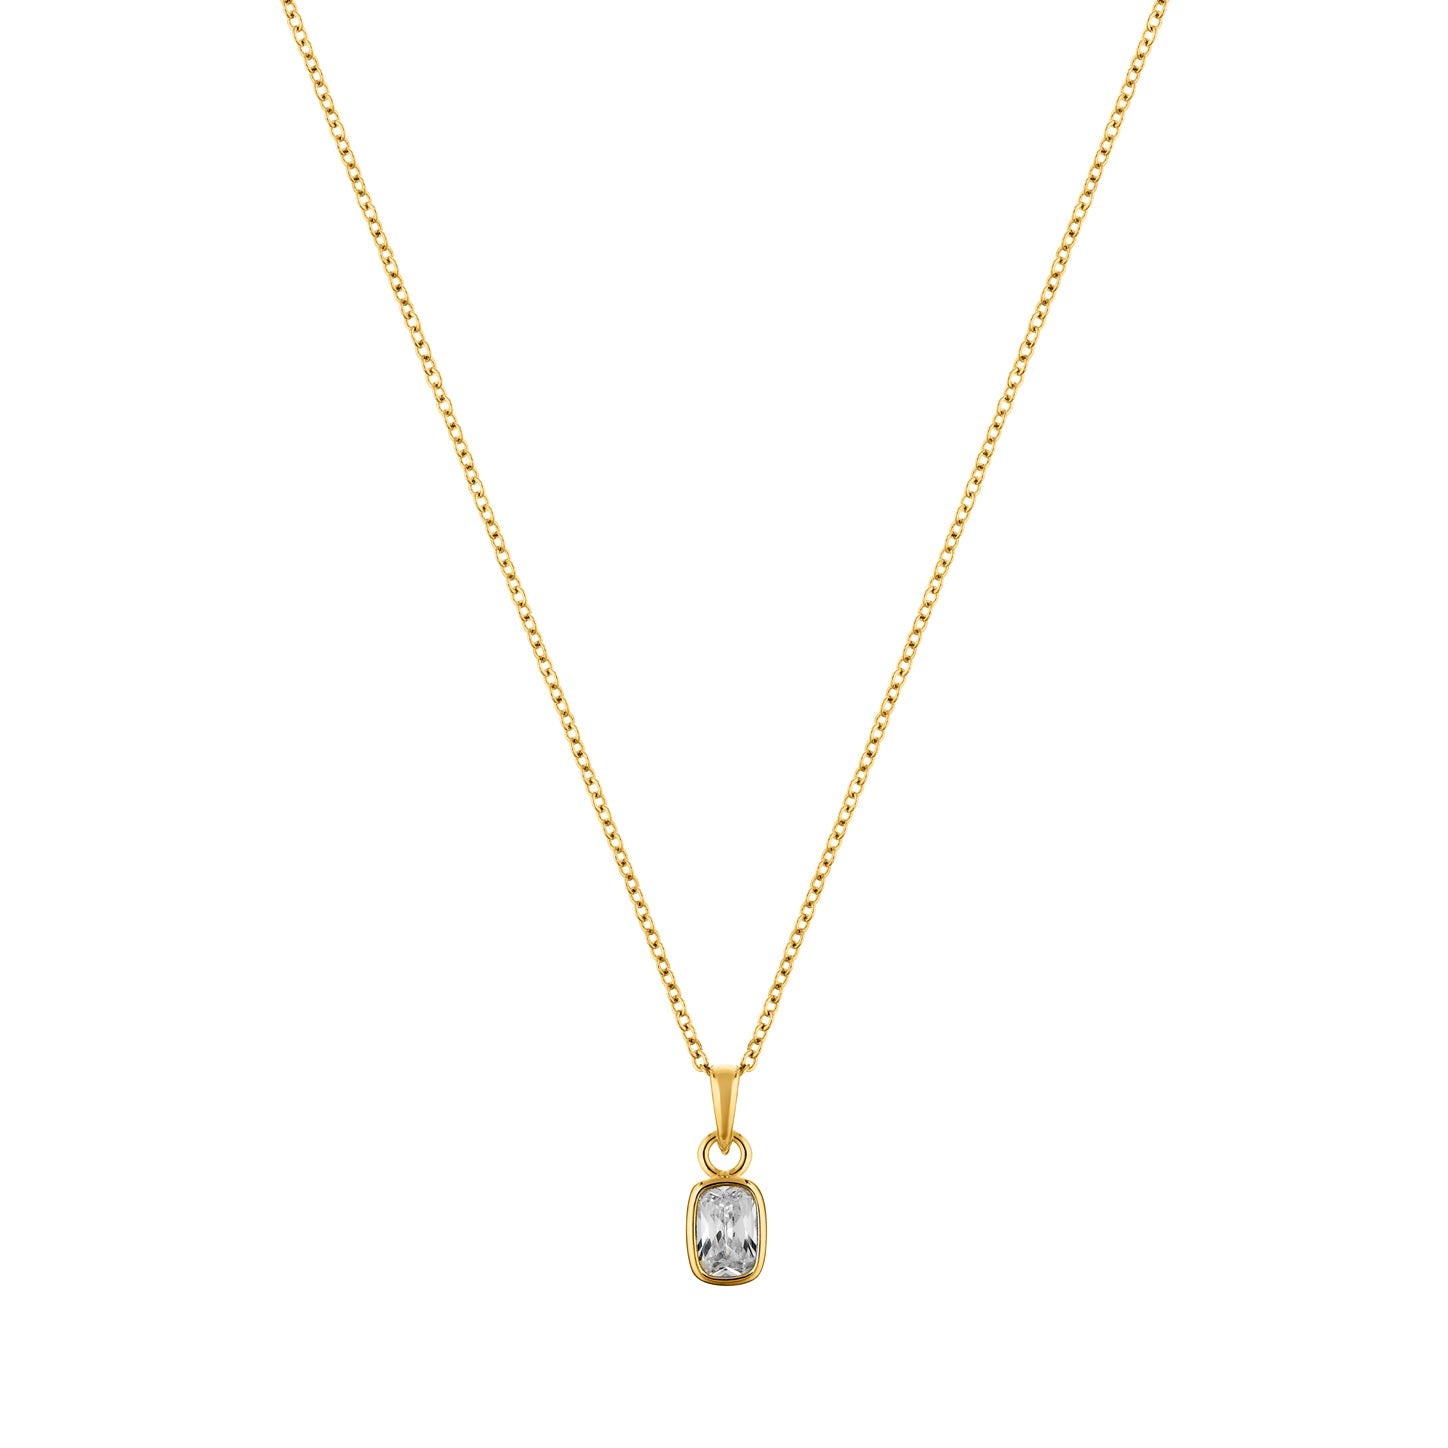 Necklace | Enigma - Gold Plated Sterling Silver -0